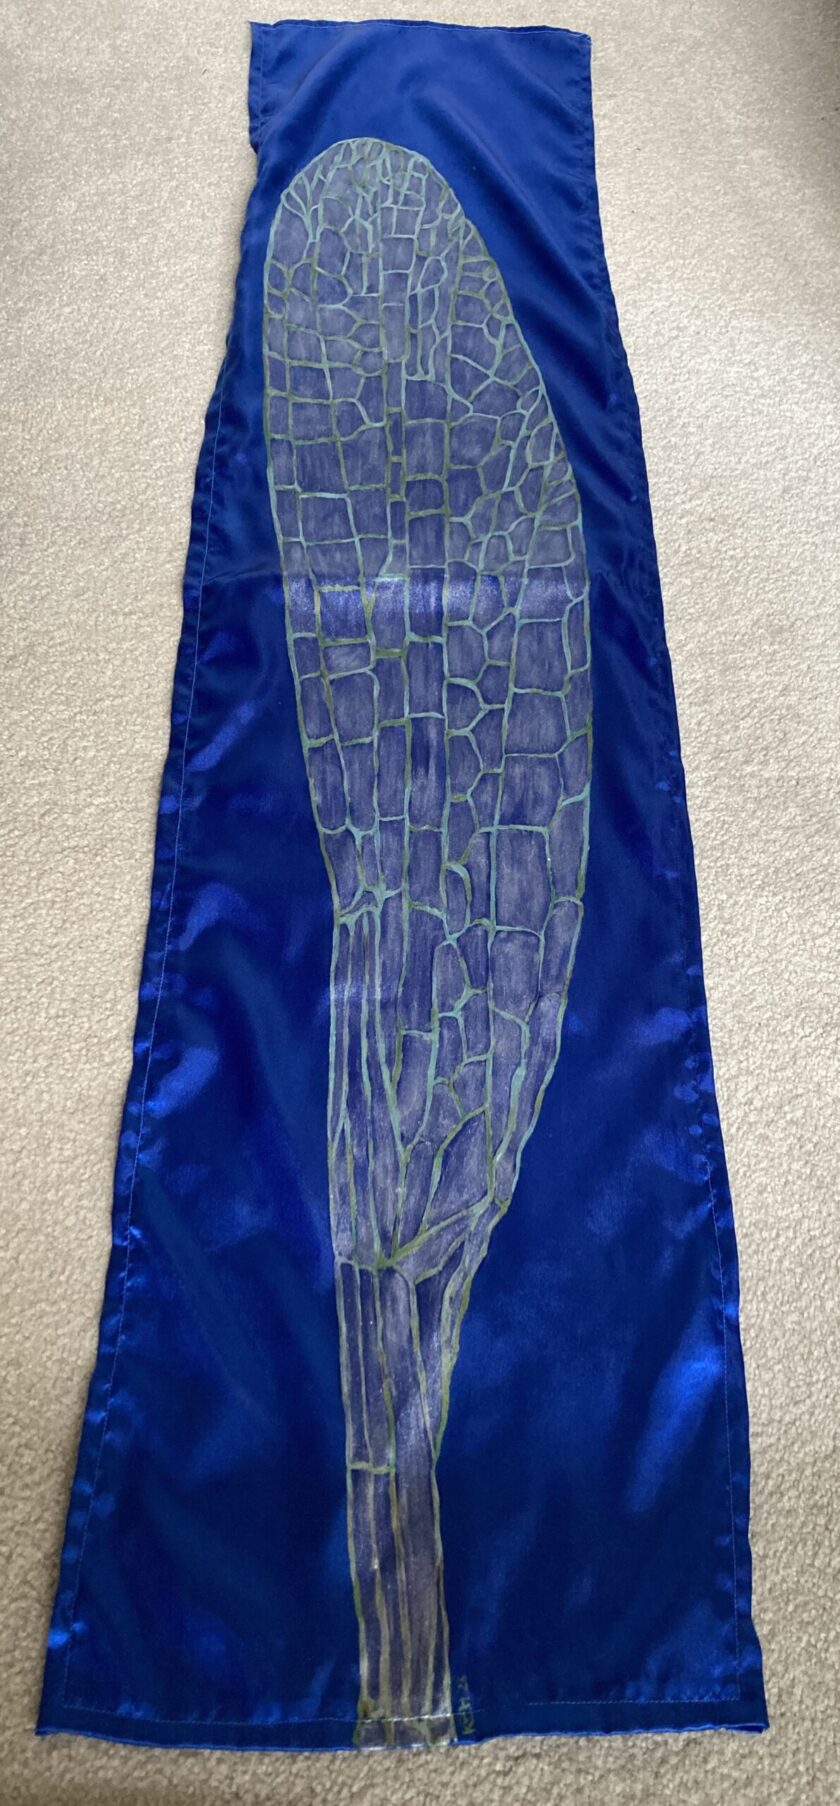 a hand-painted iridescent blue dragonfly wing scarf with a picture of a bird on it.